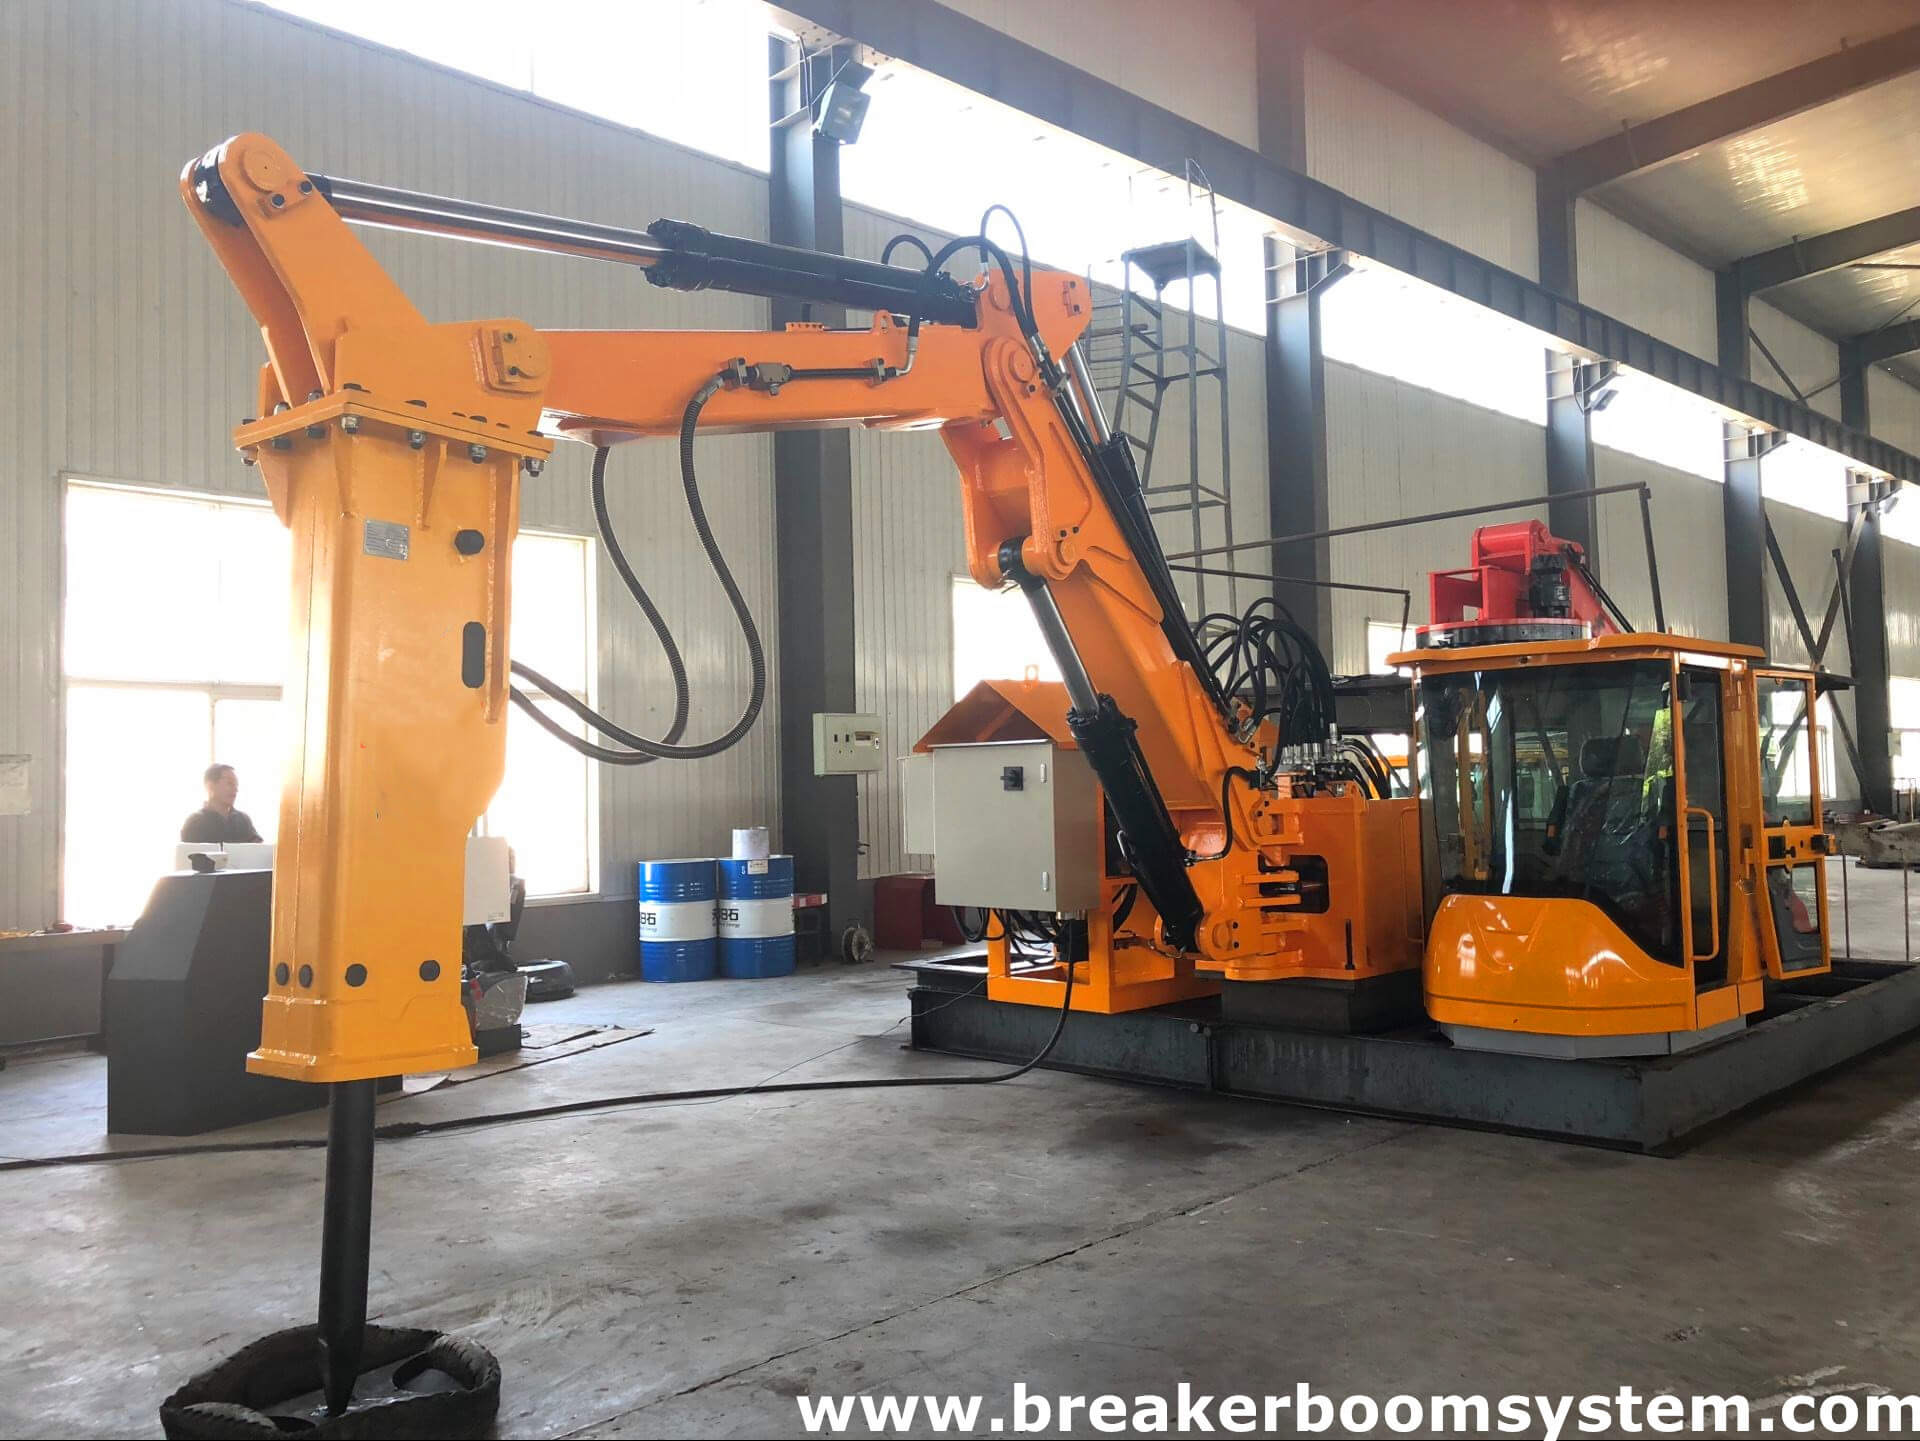 Customized Stationary Breaker Boom Systems Has Been Delivered To Australian Customer